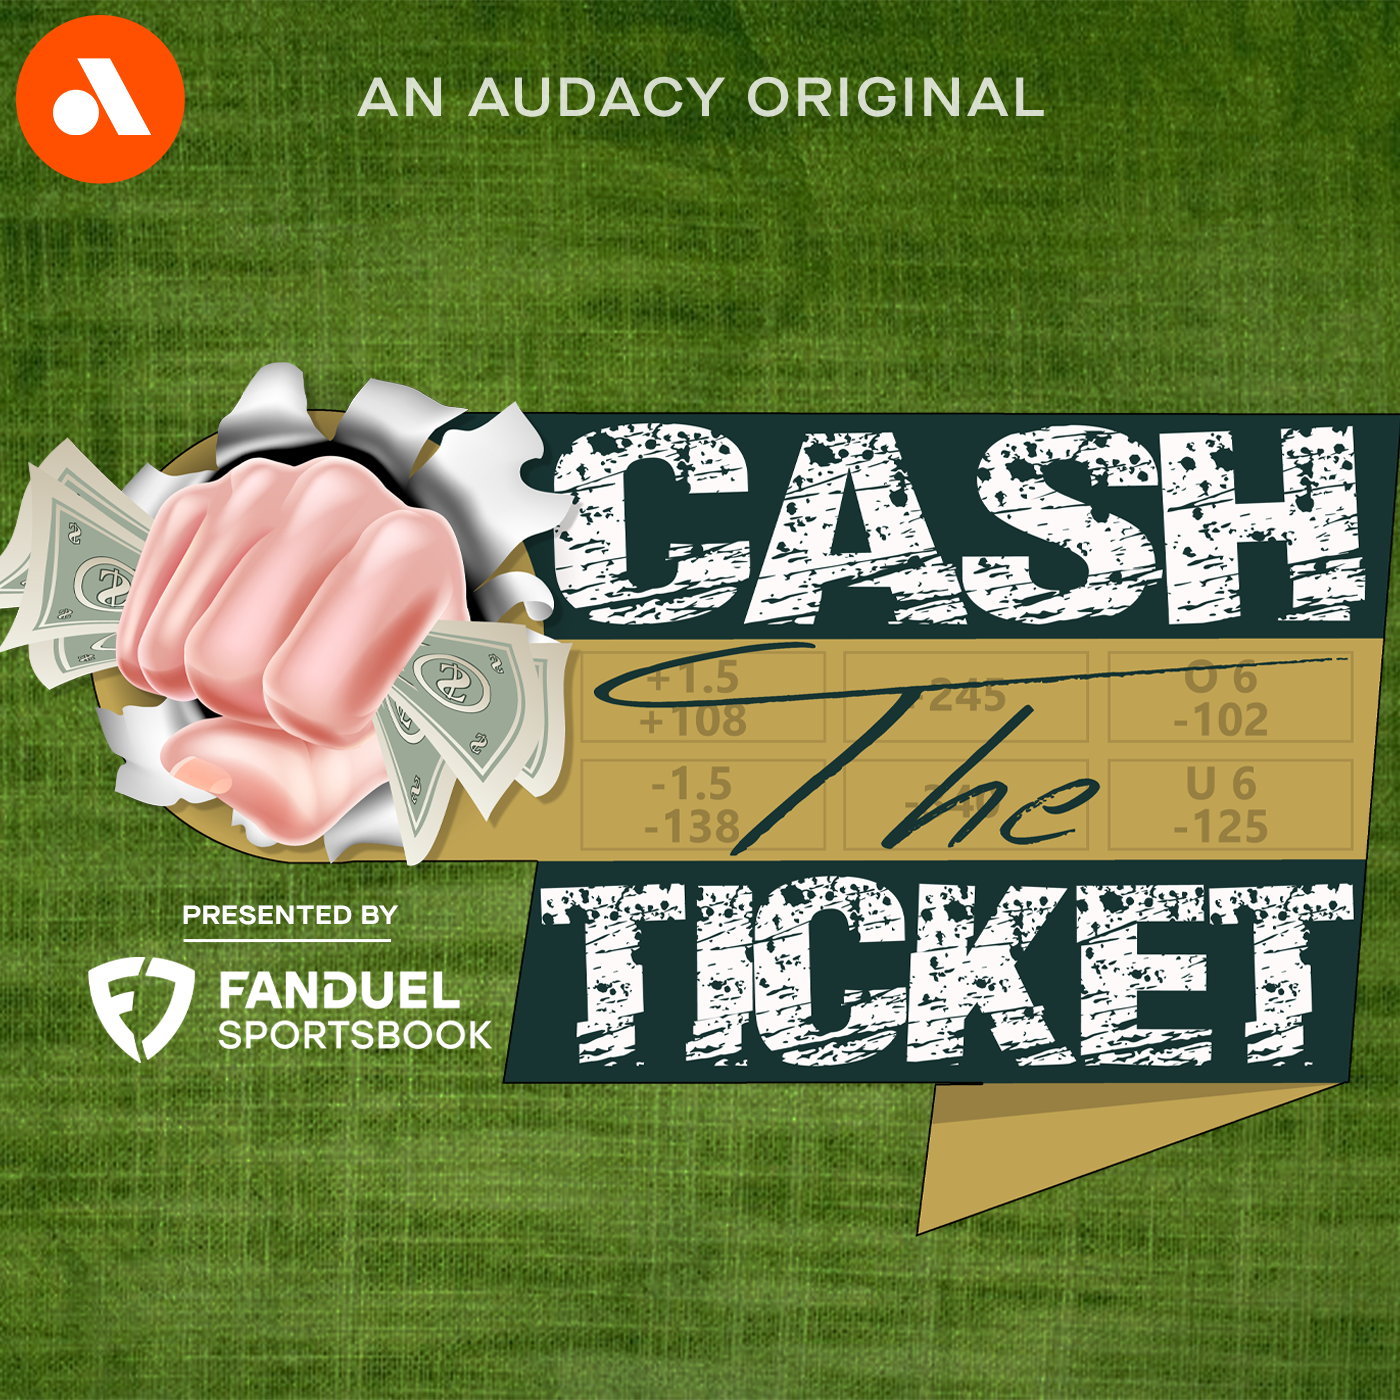 Packers -3 vs Bears | Cash the Ticket